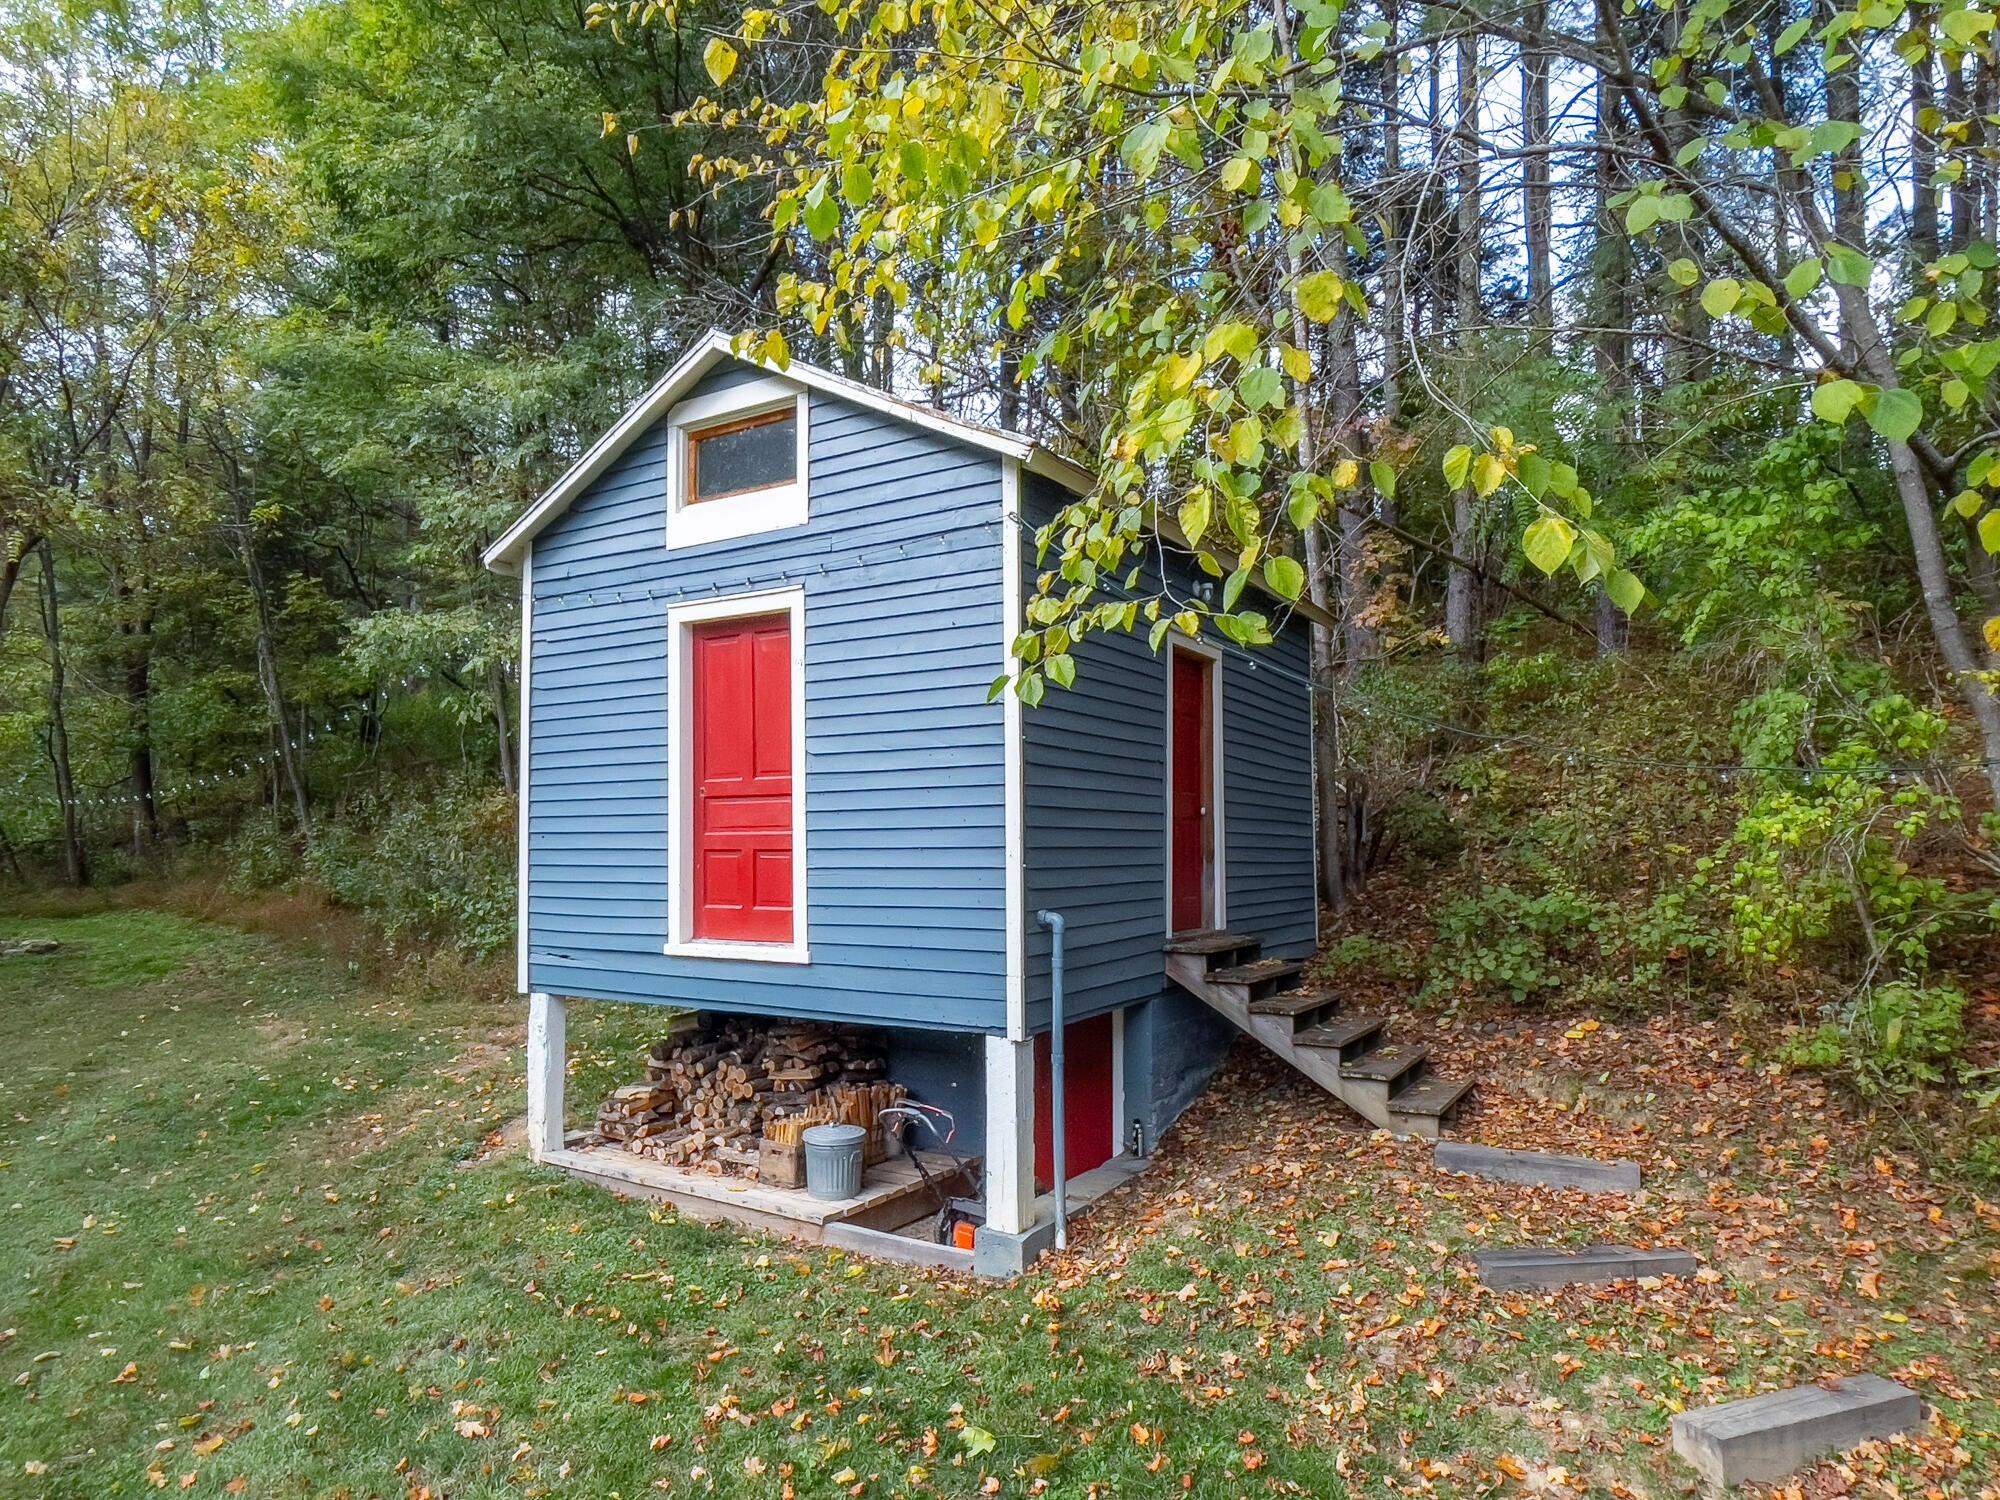 Shed for storage, workshop space or bring your own ideas!